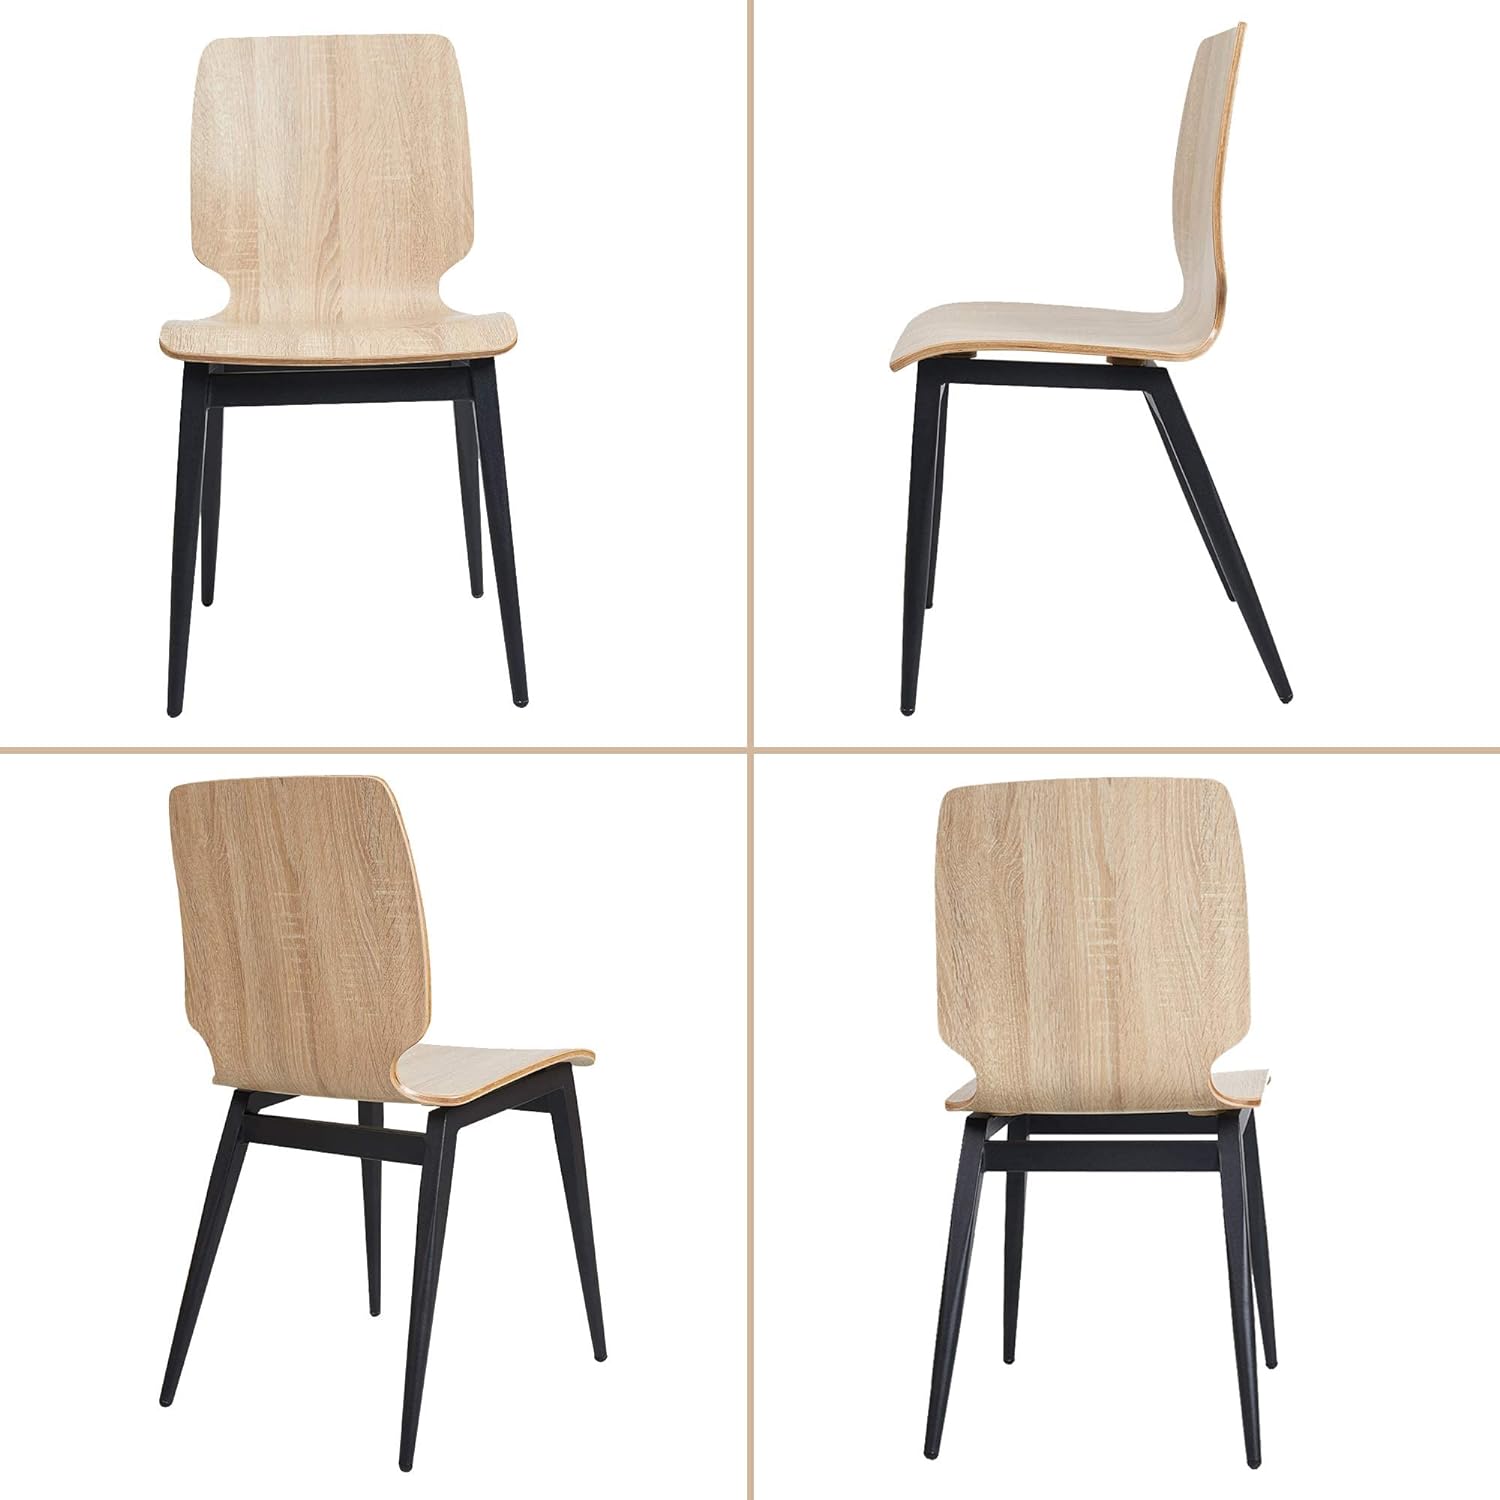 Set of 4 Modern Kitchen Chairs with Wooden Seats Metal Legs Dining Side Chair, Light Brown Curved Edge